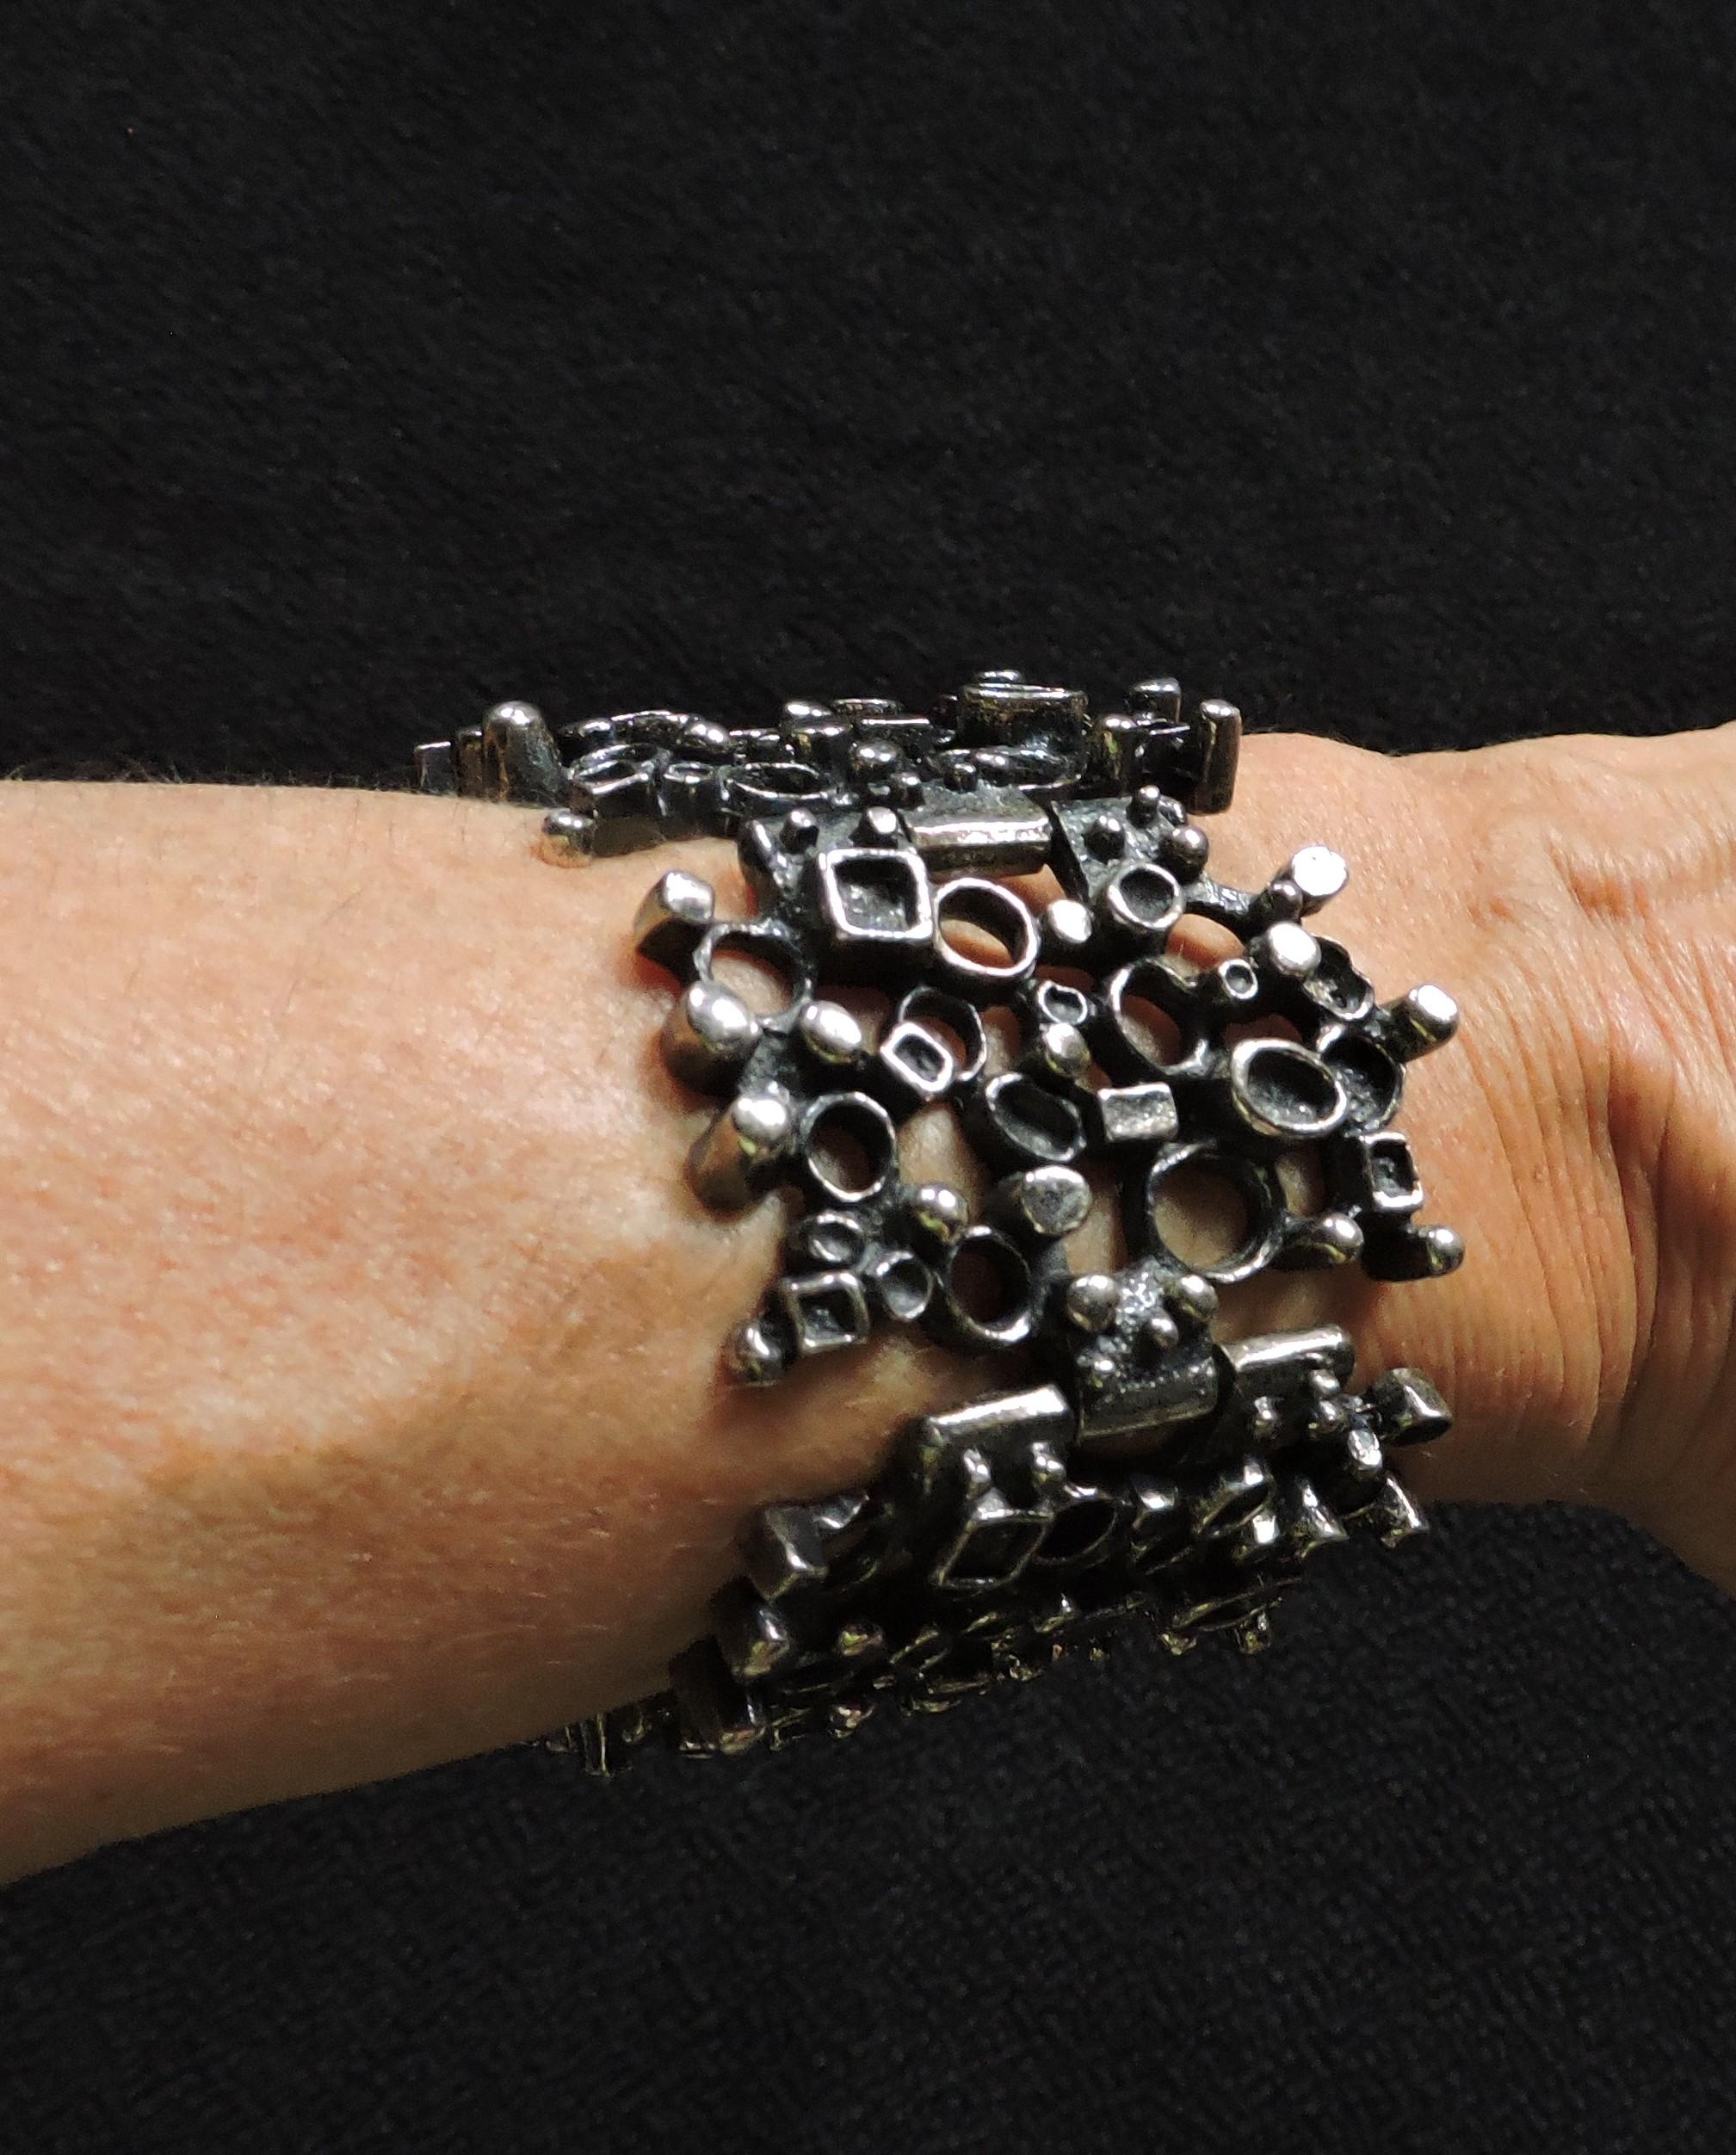 Robert Larin Brutalist Modernist Sculptural Bracelet, Canadian Art Jewelry In Good Condition For Sale In Chesterfield, NJ